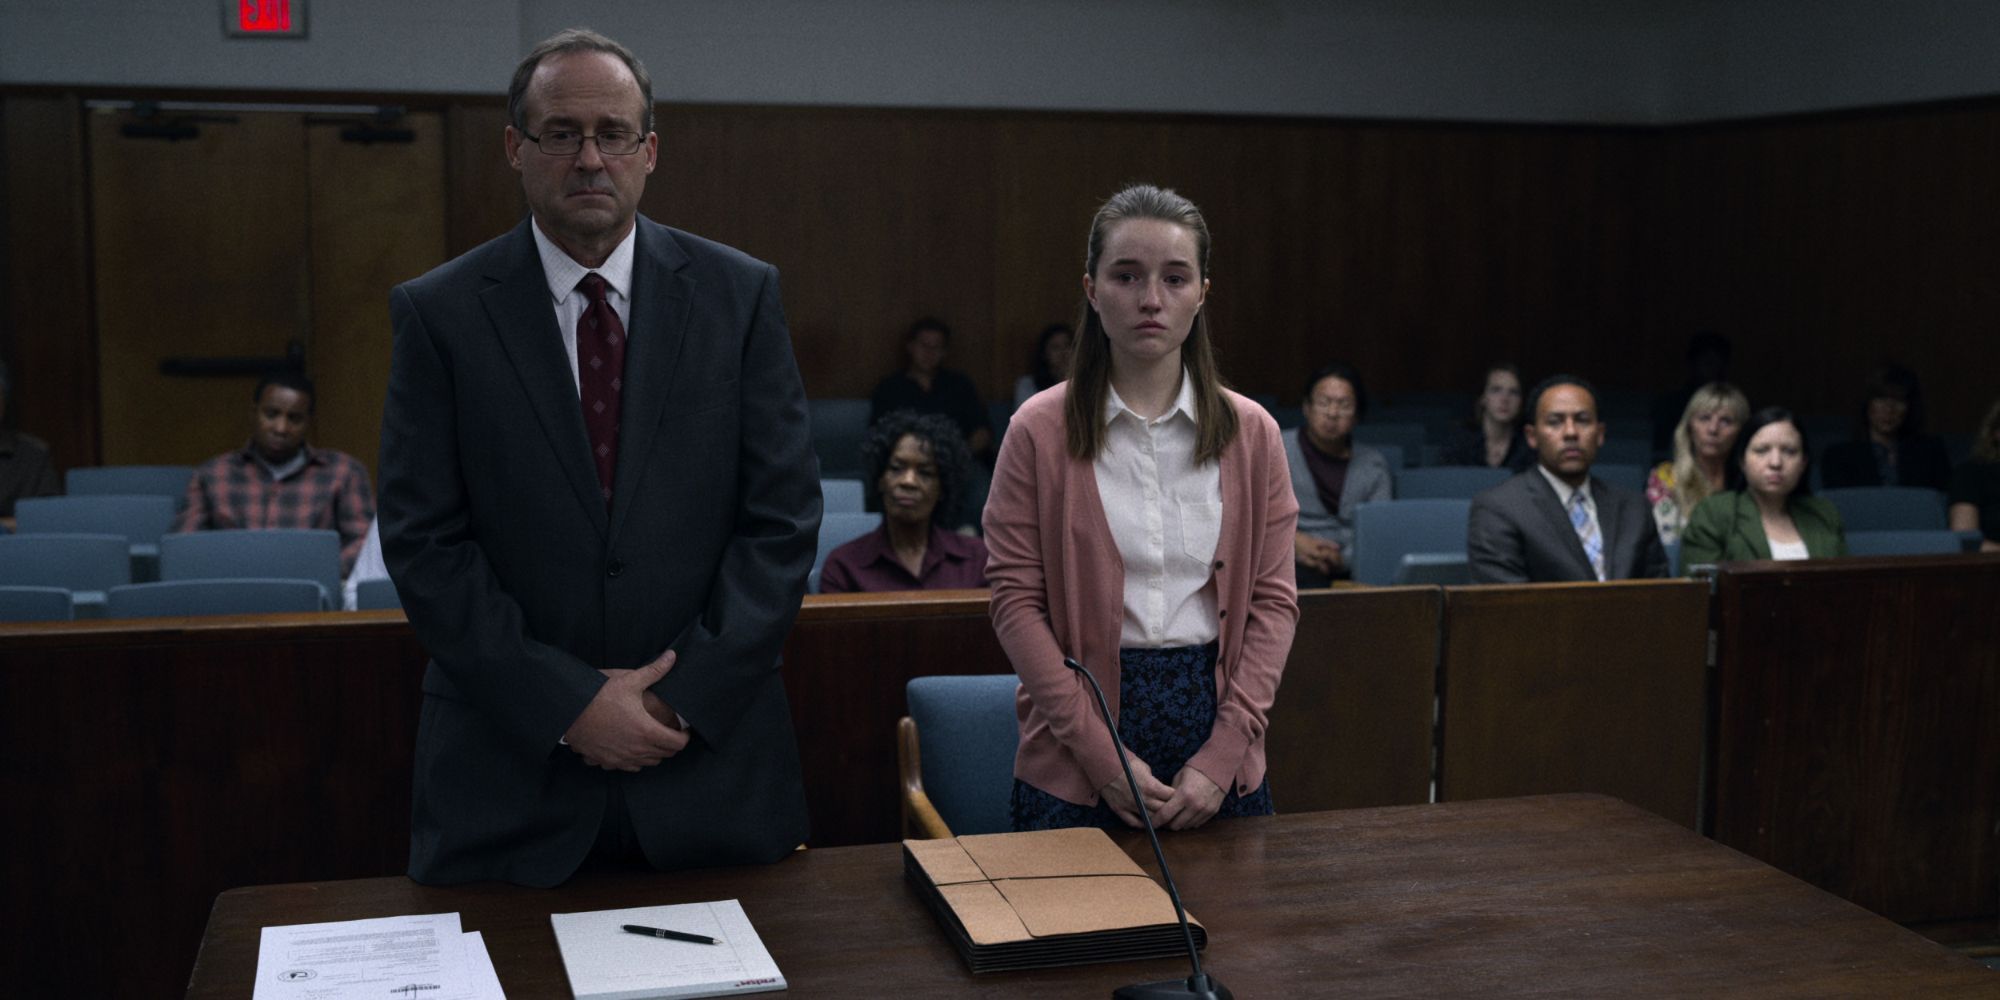 A girl and her attorney standing at the court